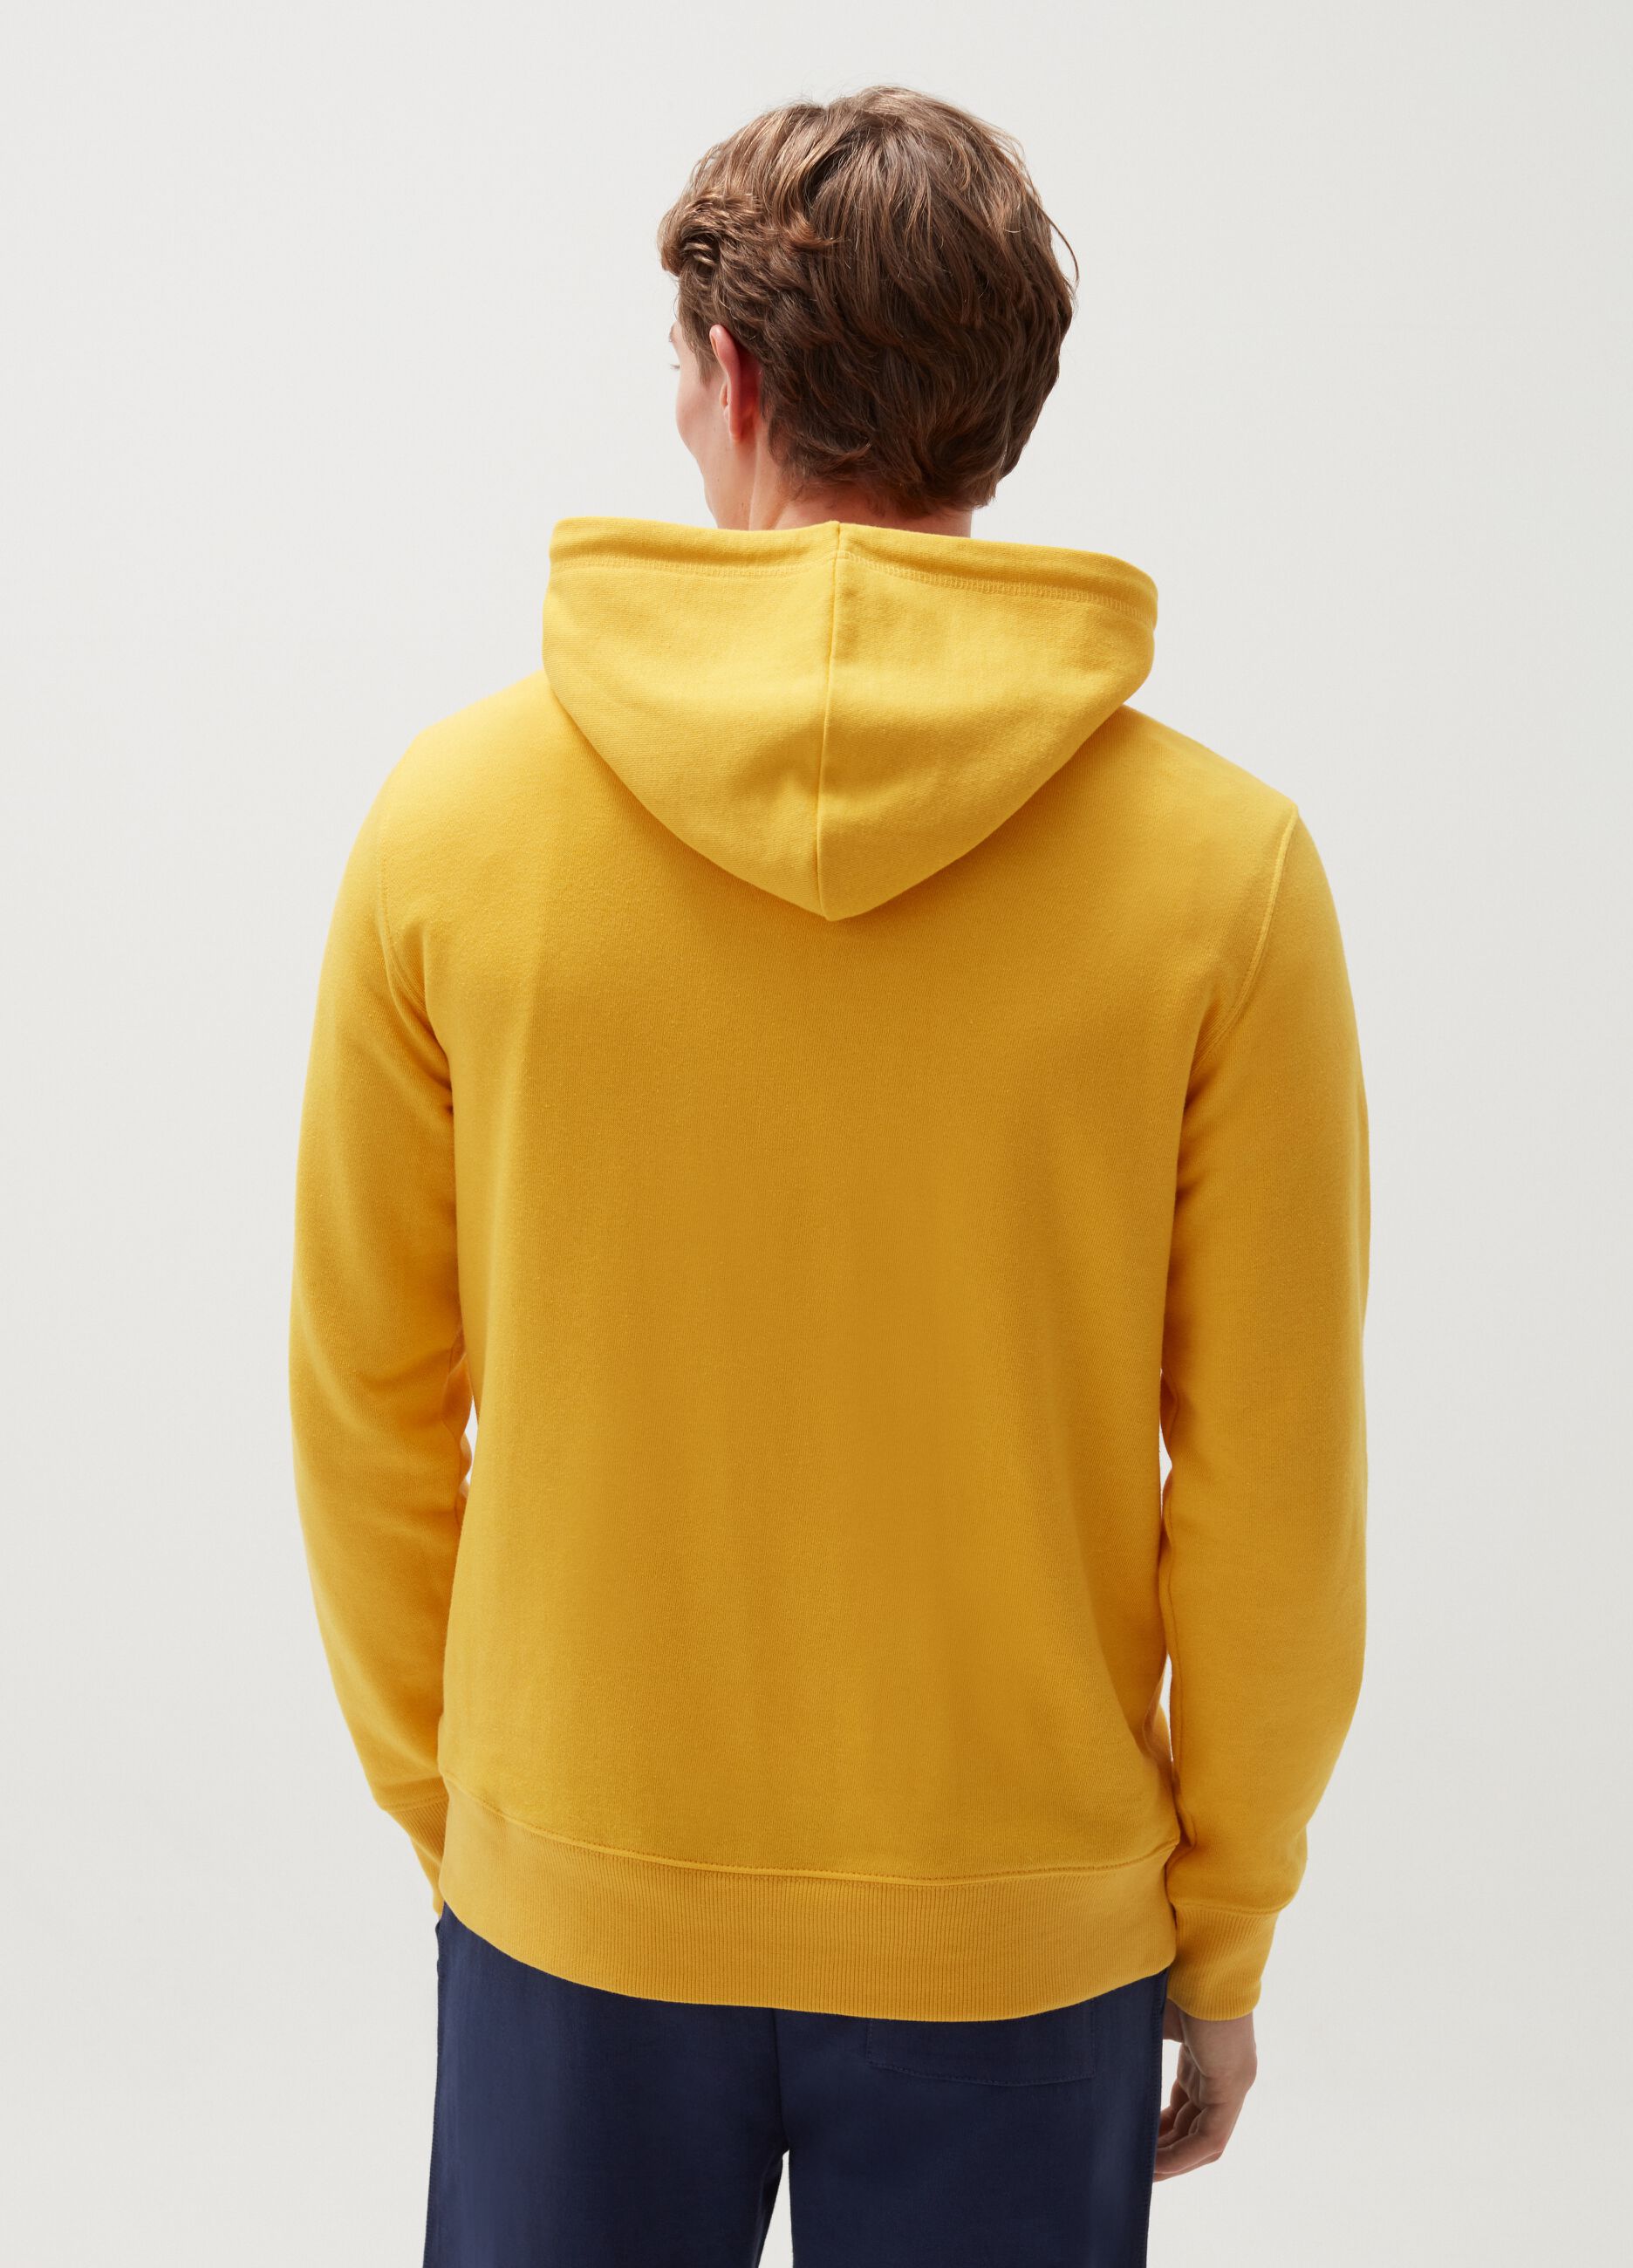 Sweatshirt with hood and pouch pocket